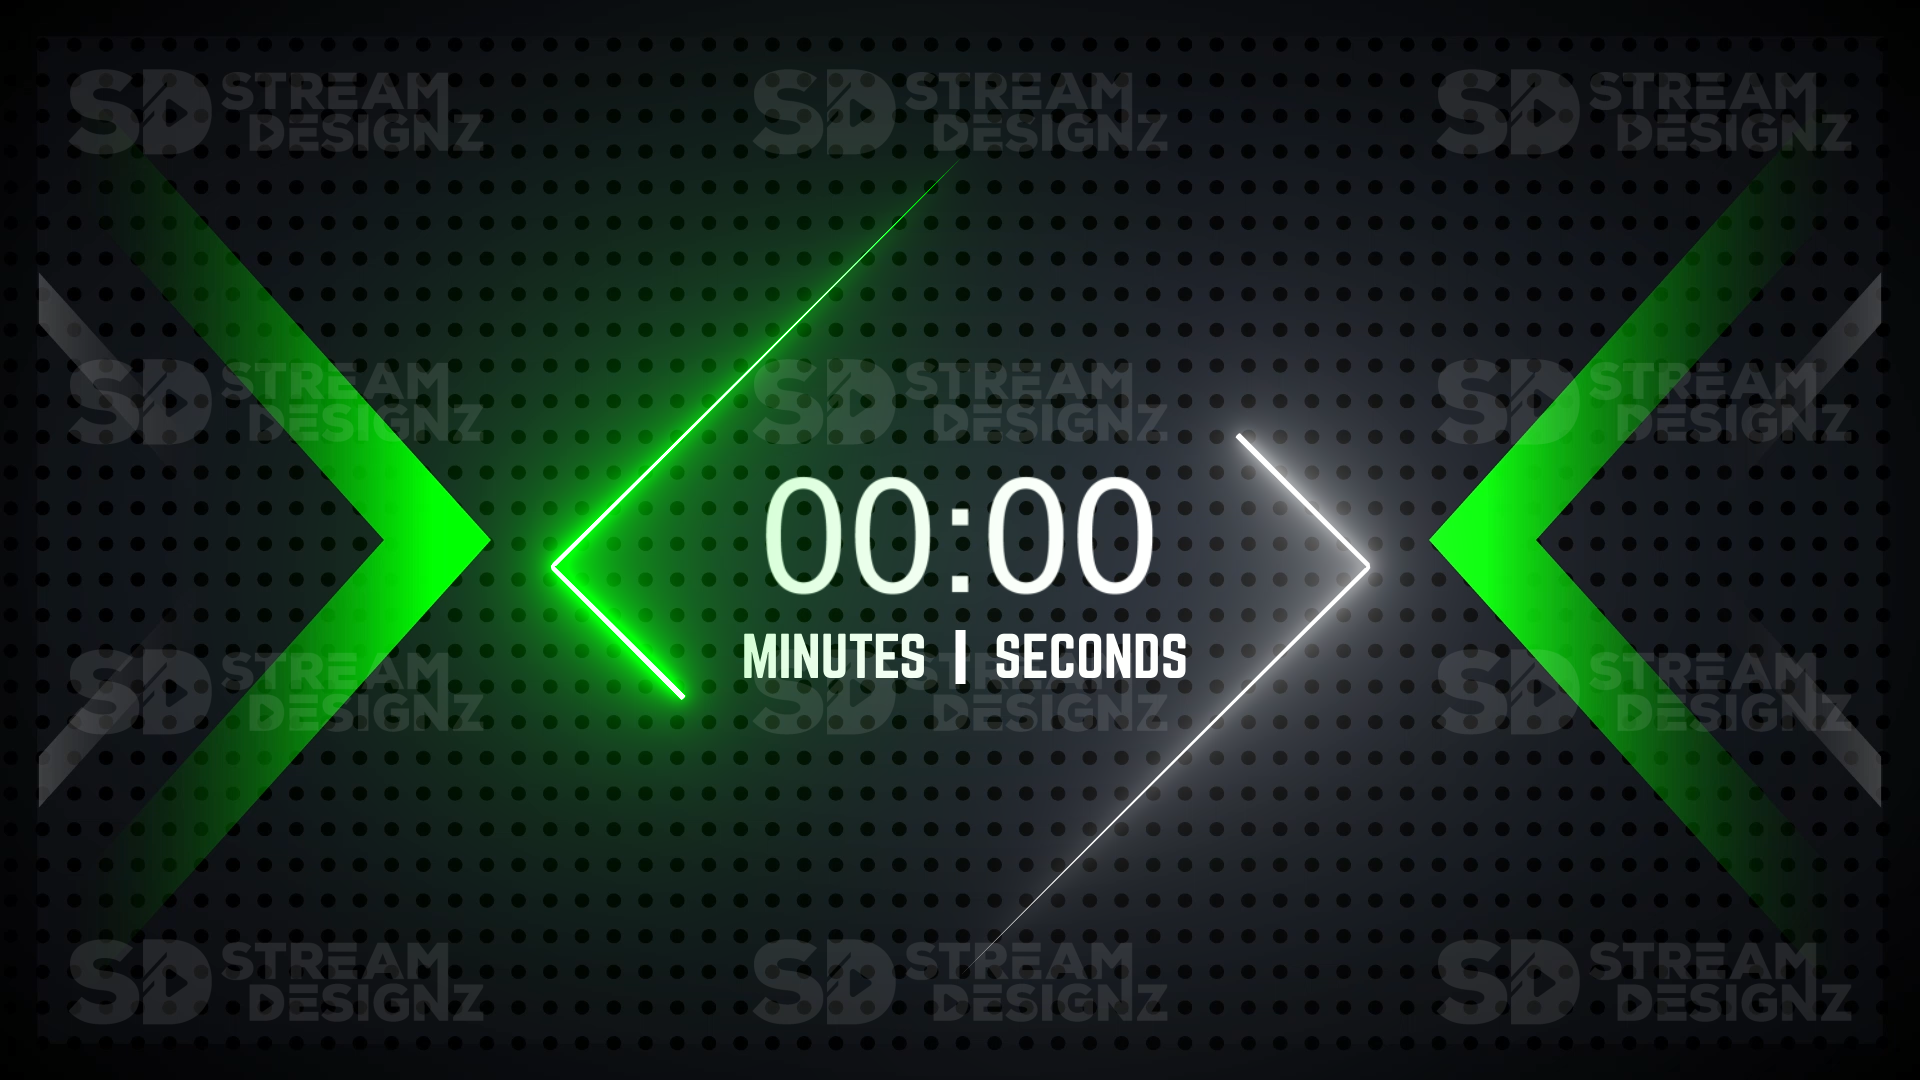 5 minute count up timer green arrow preview video stream designz